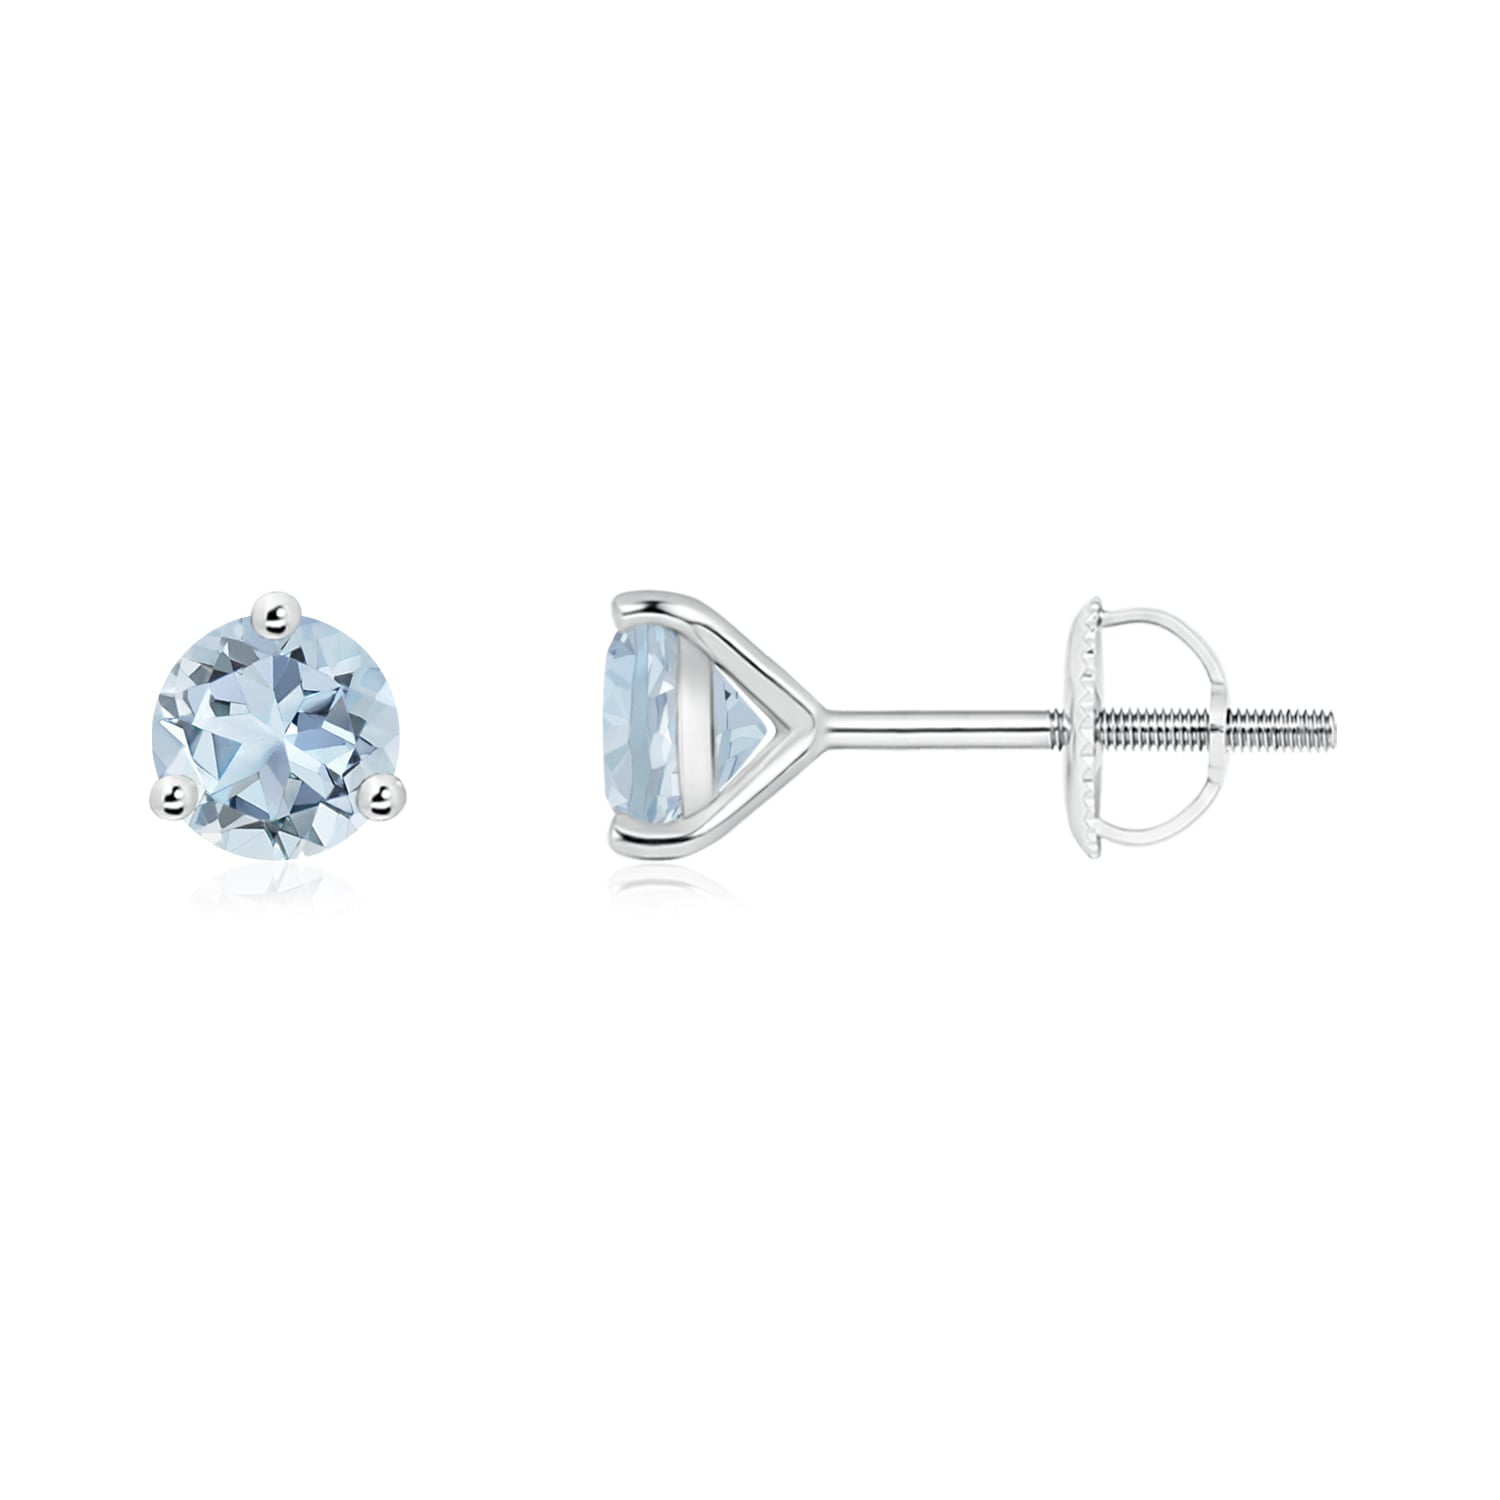 Details about   3 Ct Oval Aquamarine & CZ Women's Flower Stud Earring 14k White Gold Over Silver 